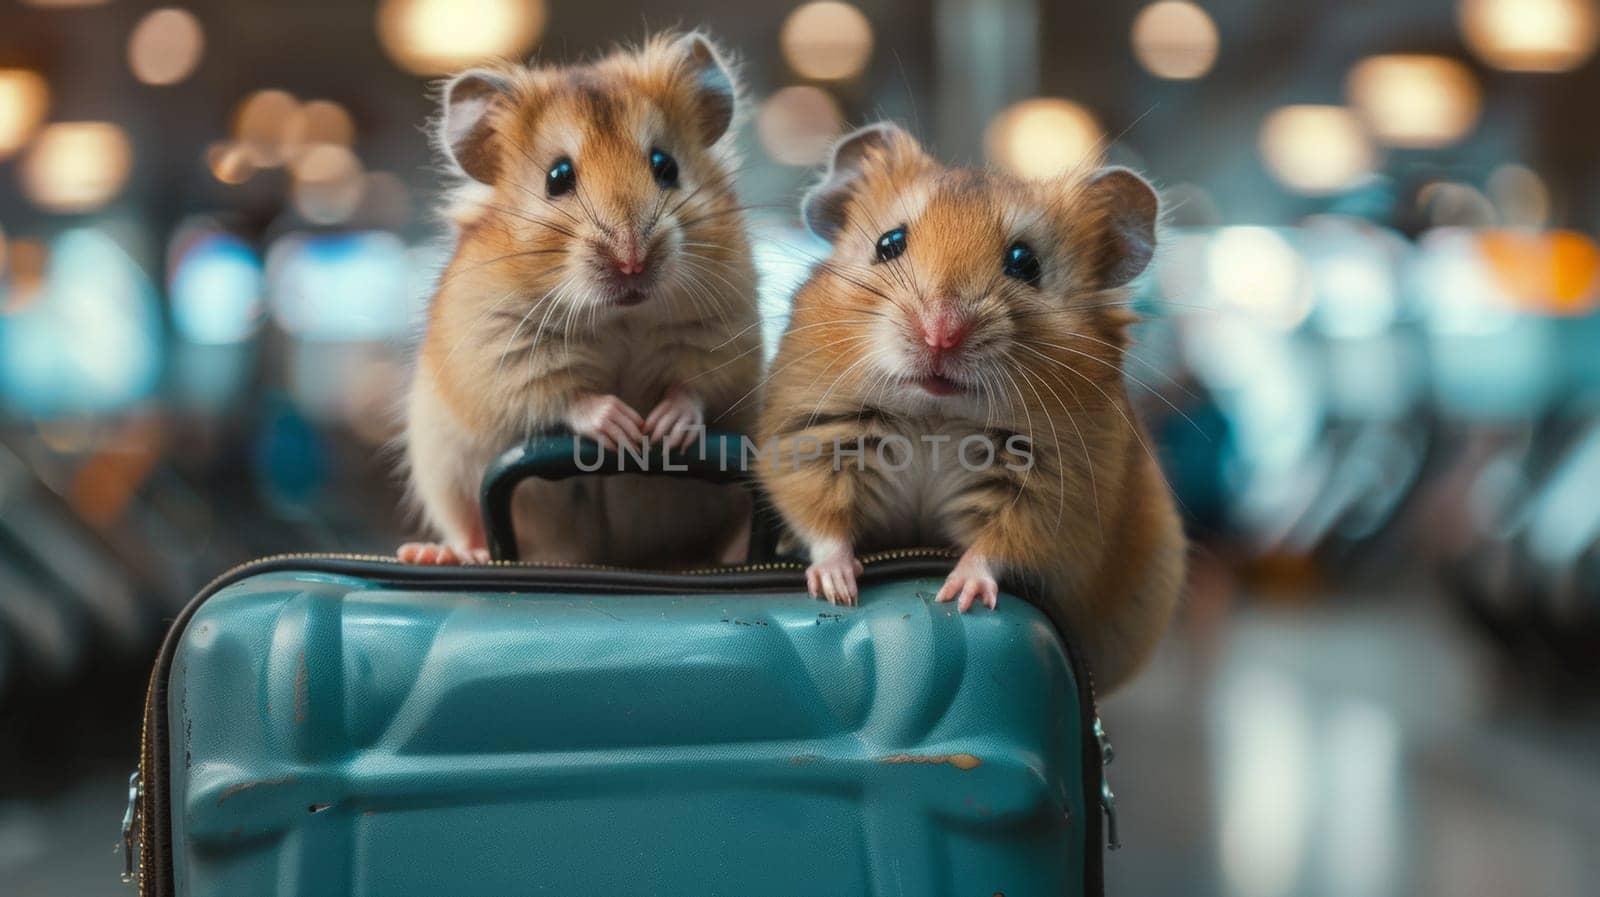 Two hamsters are sitting on top of a blue suitcase, AI by starush